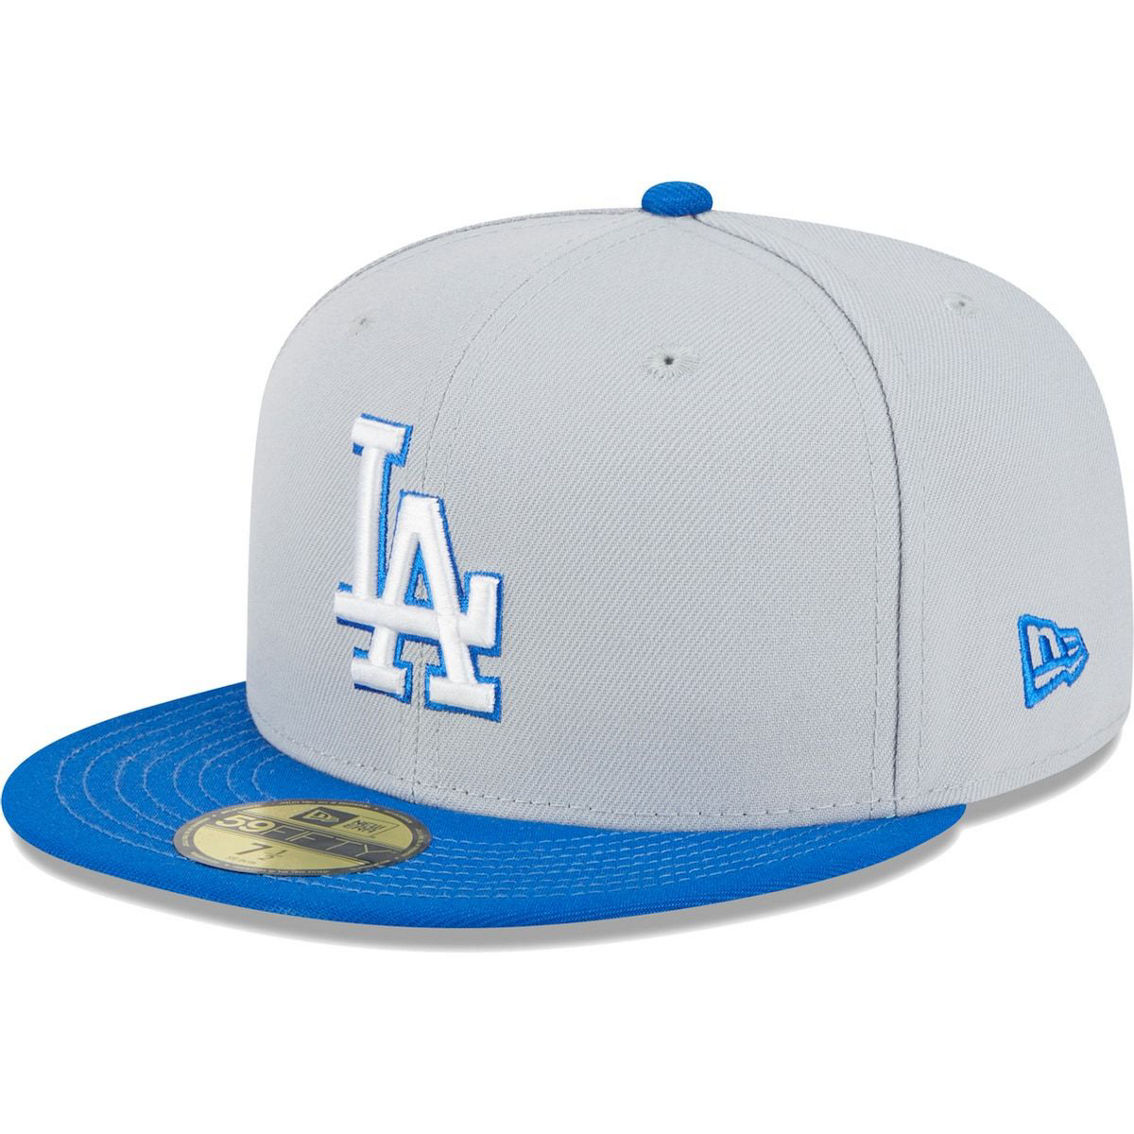 New Era Men's Gray/Blue Los Angeles Dodgers Dolphin 59FIFTY Fitted Hat - Image 4 of 4